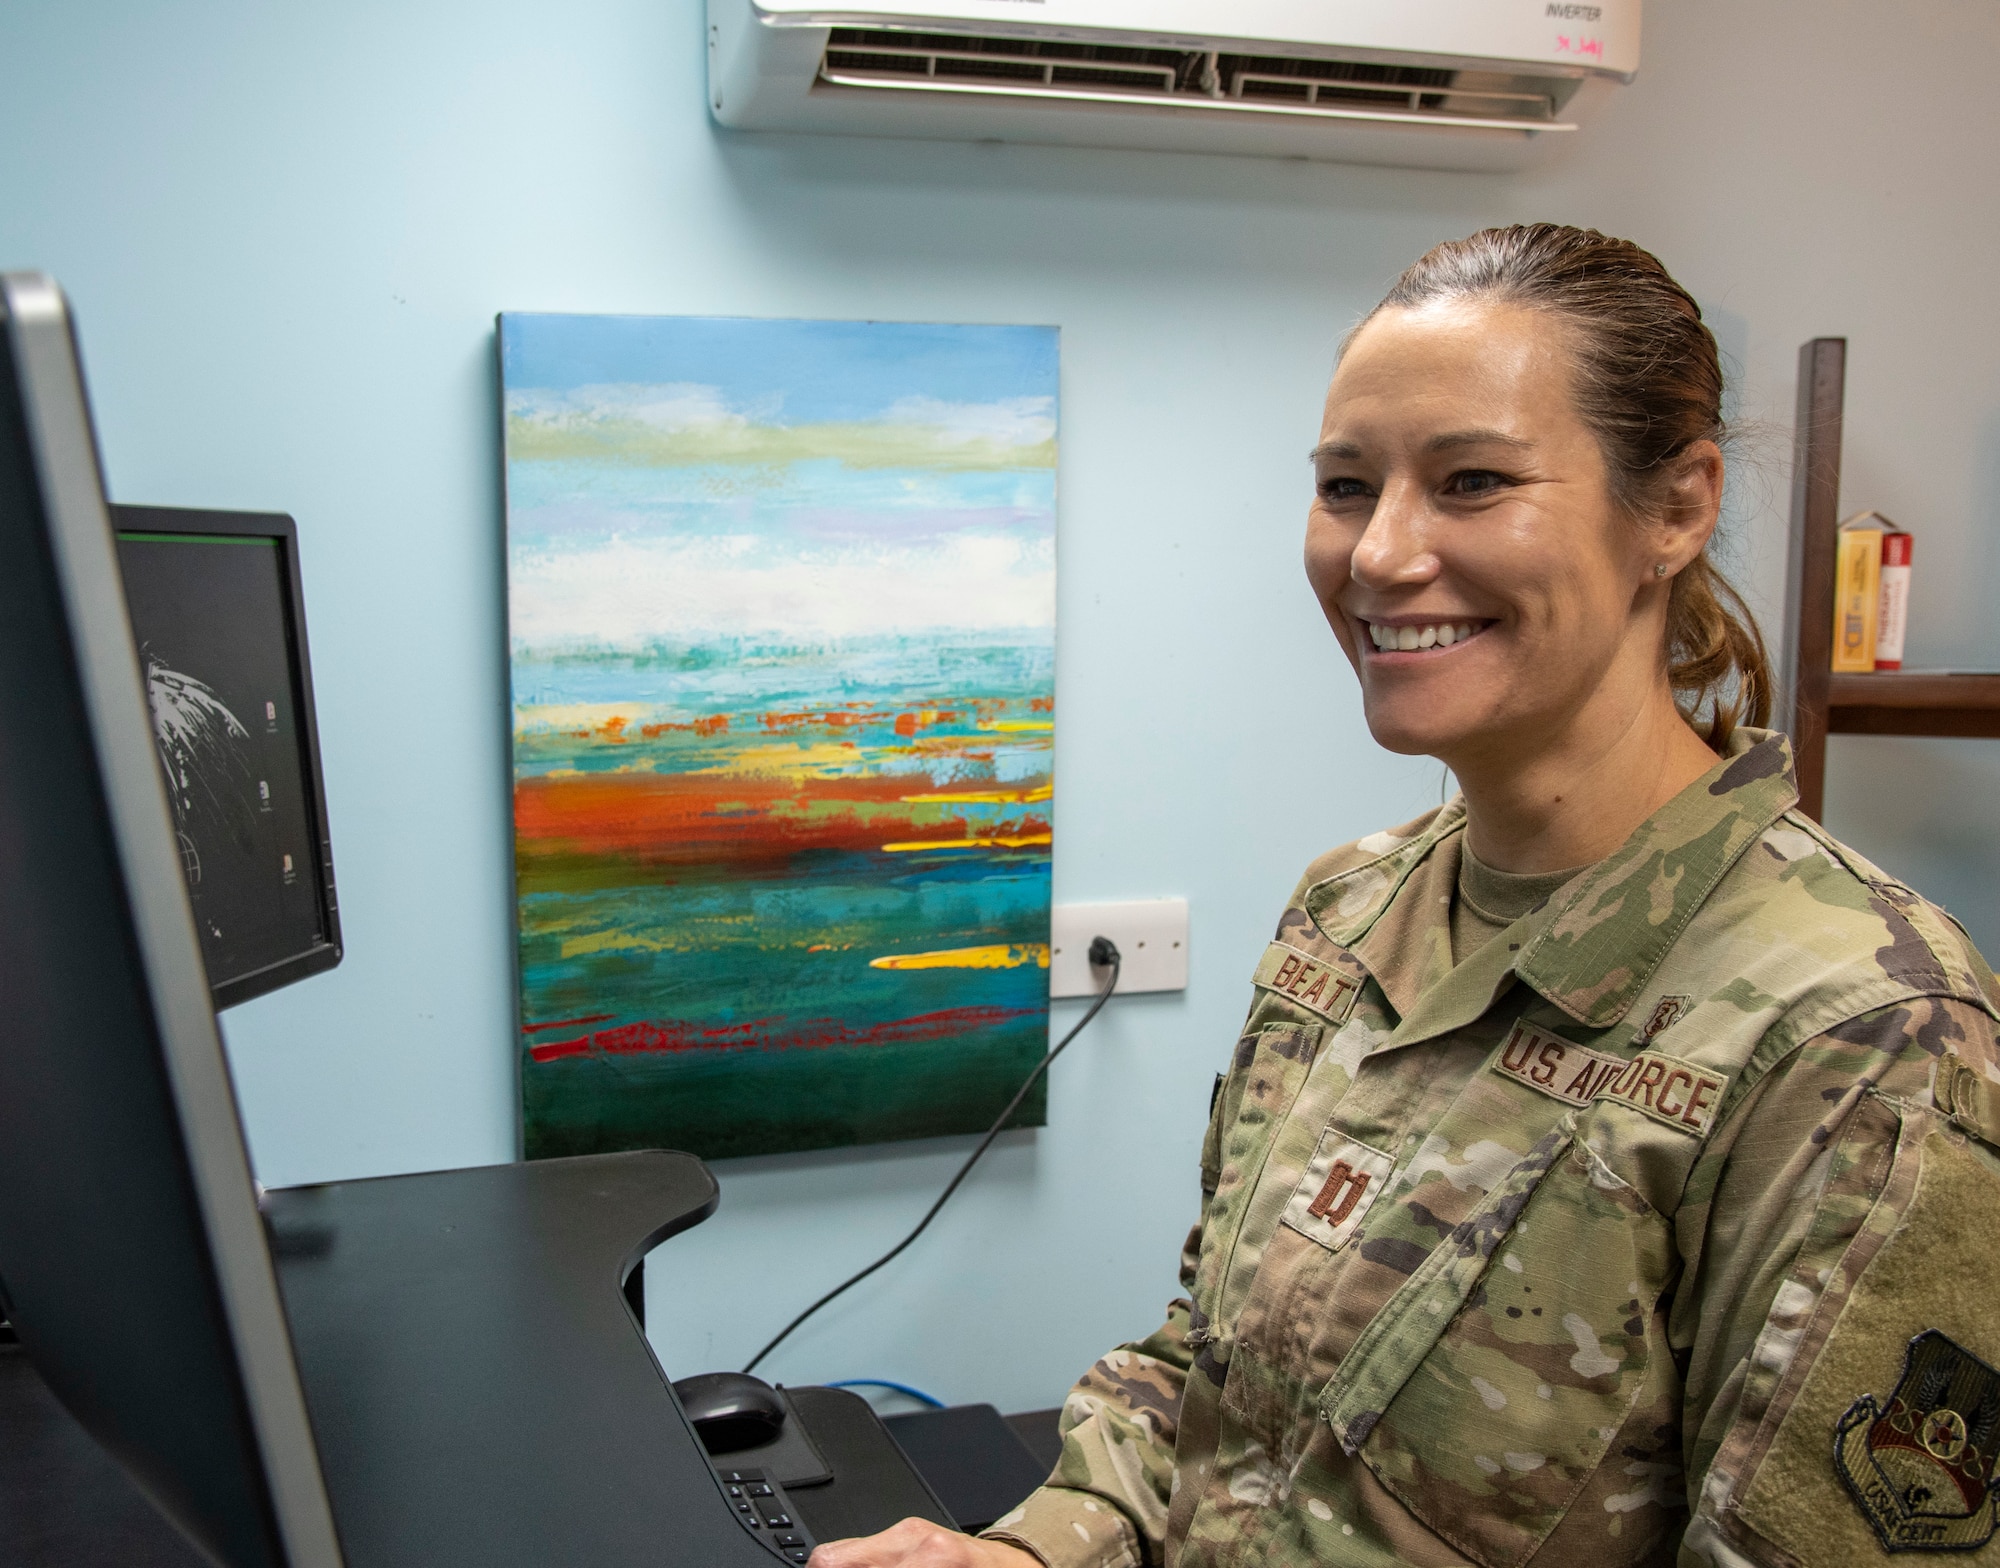 U.S. Air Force Capt. Suzan Beattie, 332d Expeditionary Medical Squadron Chief of Mental Health in her office at an undisclosed location in Southwest Asia, Sept. 9, 2022. Beattie is one of the professionals responsible for suicide prevention and other mental healthcare at the 332d Air Expeditionary Squadron. (U.S. Air Force photo by: Tech. Sgt. Jim Bentley)